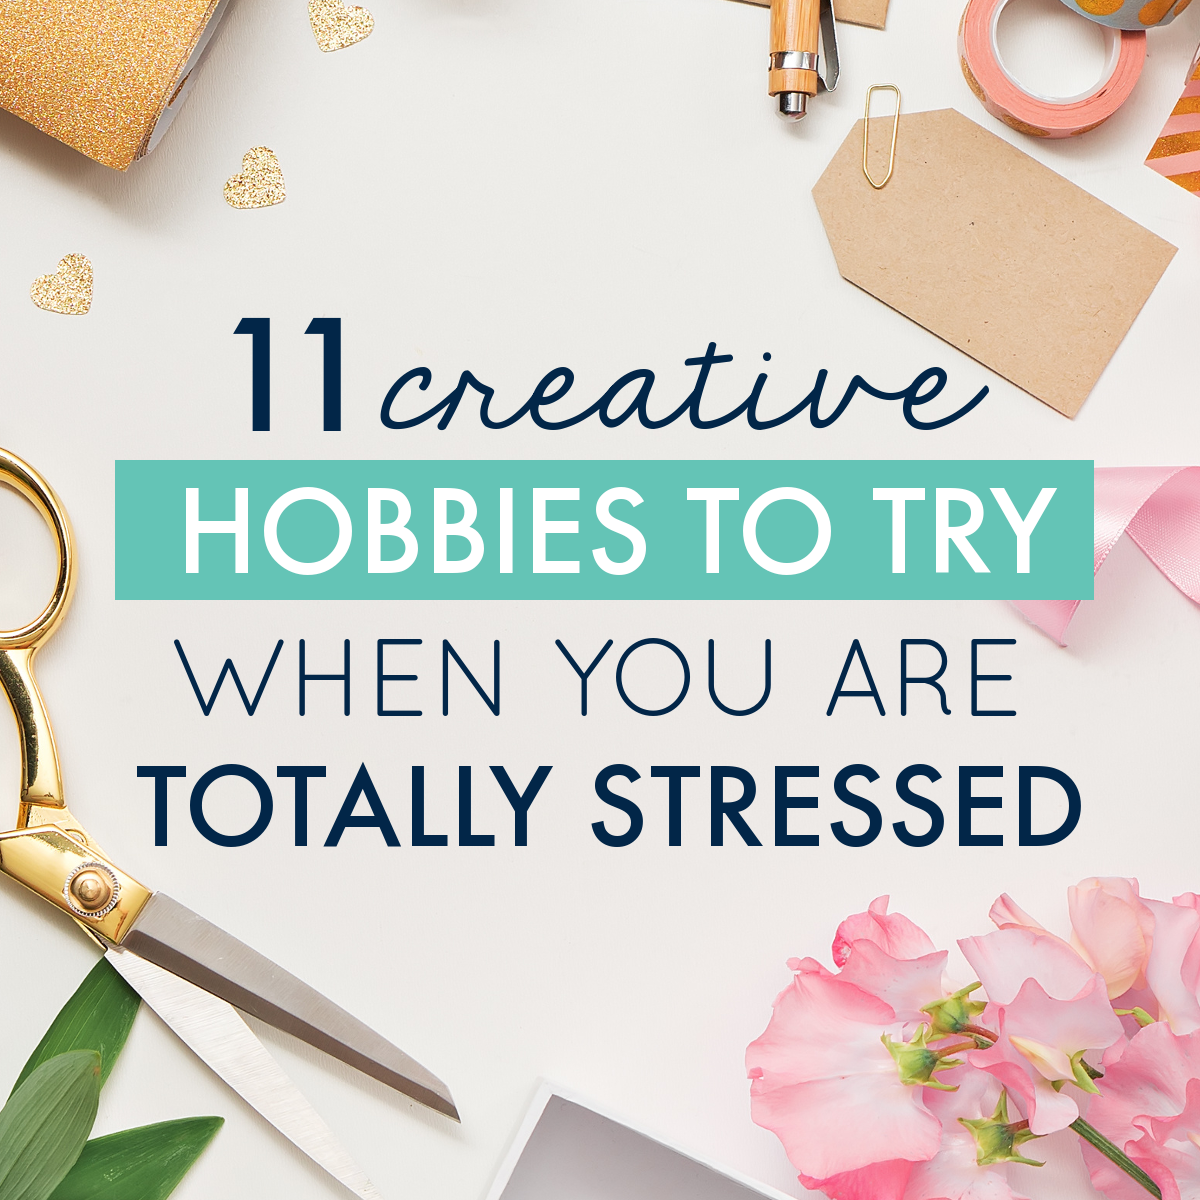 11 Creative Hobbies to Try When You are Totally Stressed